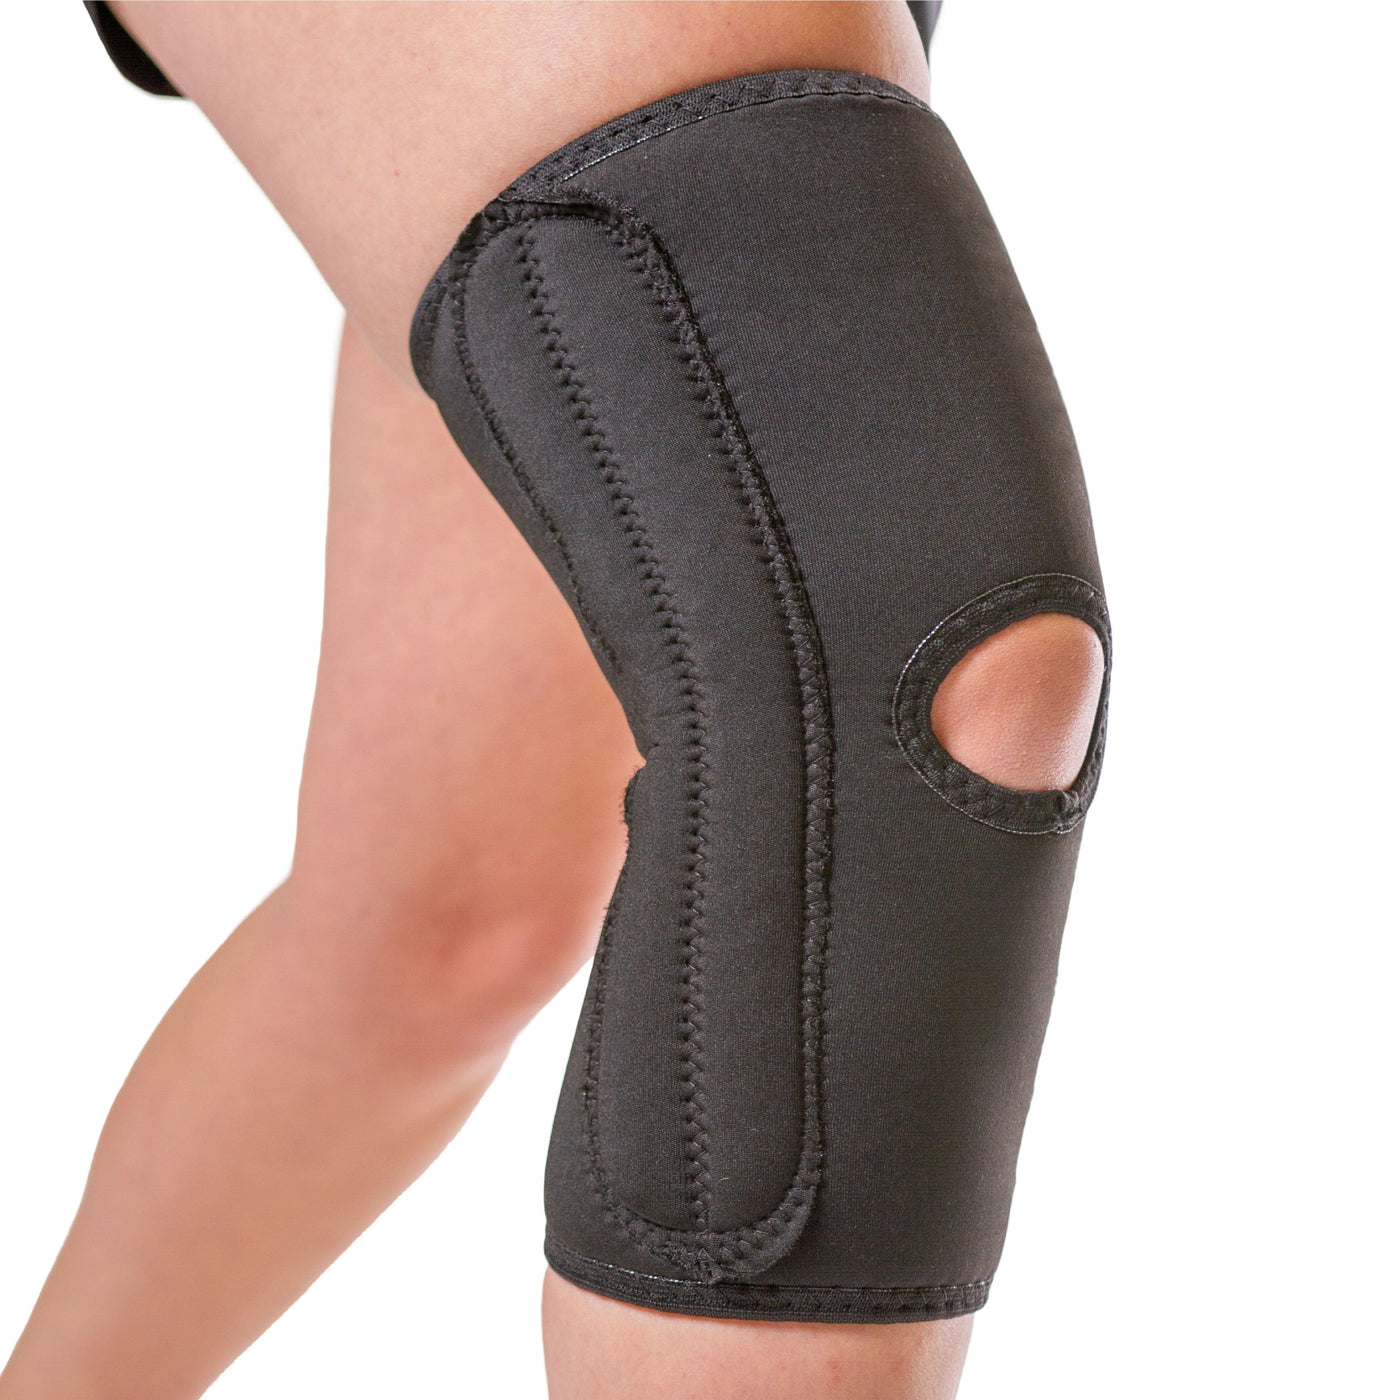 The BraceAbility Women's Knee Sleeve is made with a breathable material and comes in plus sizes up to 4XL